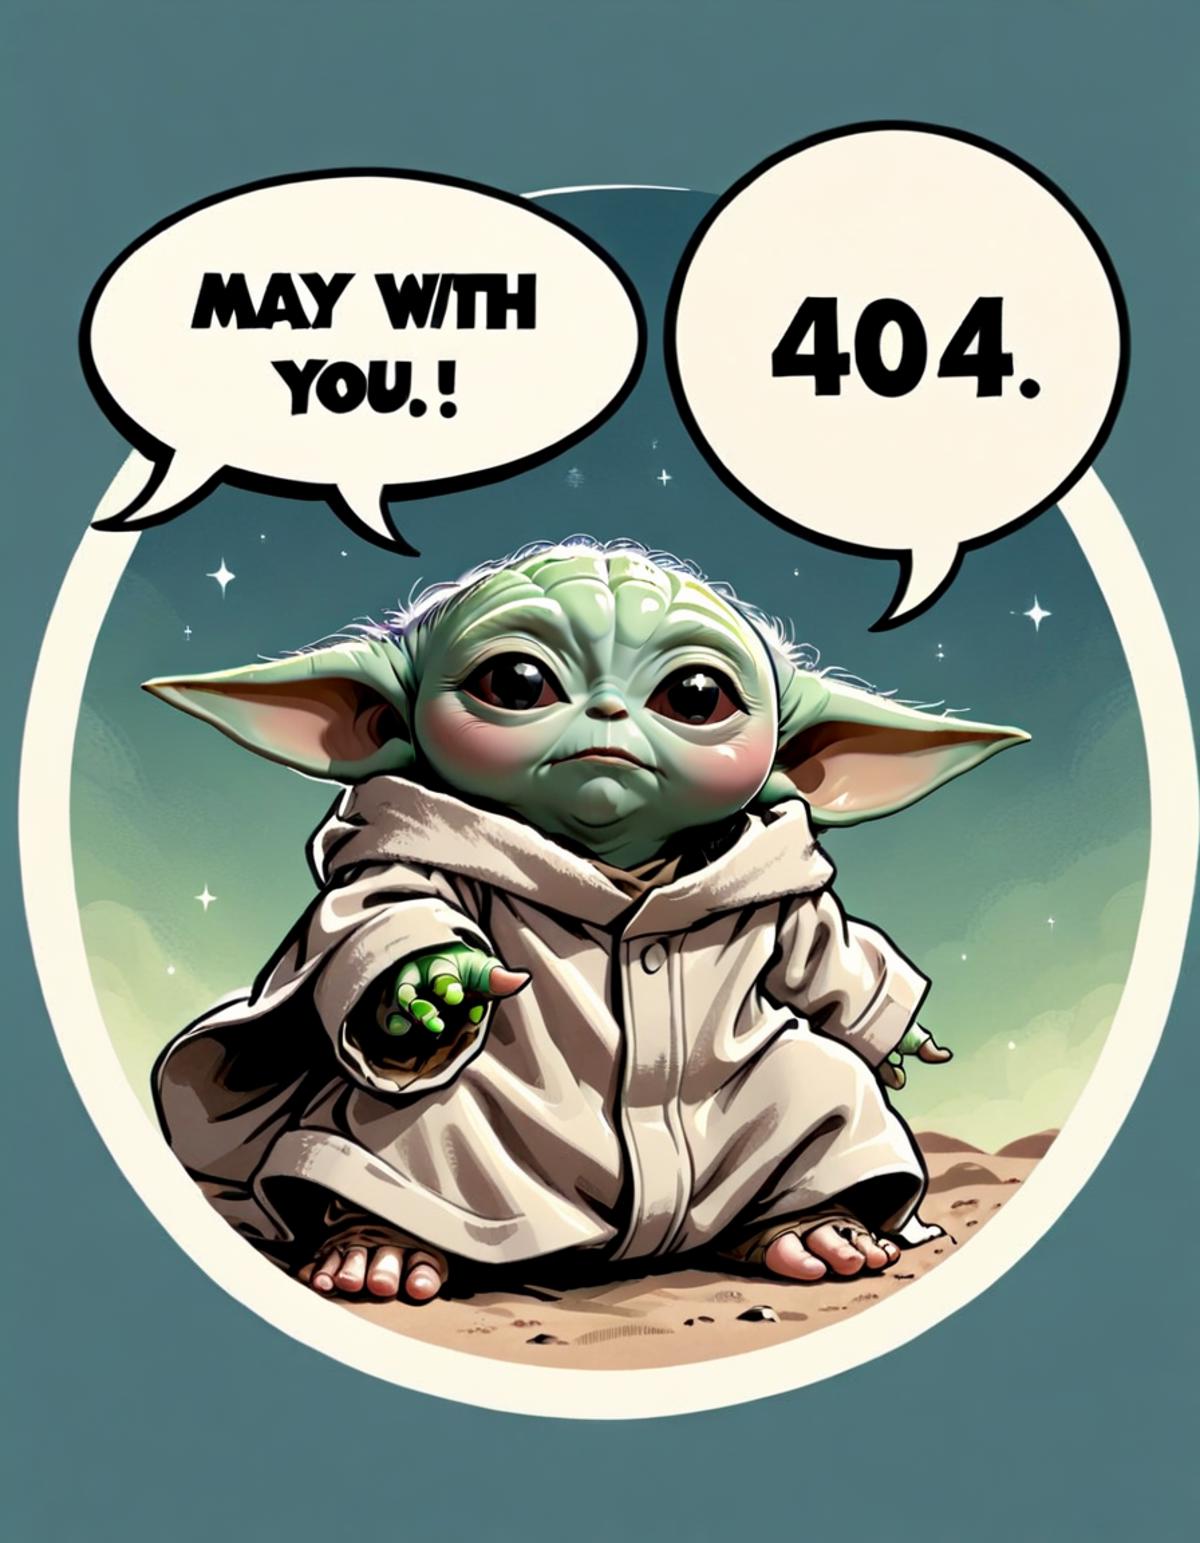 May the 4th Be with You: A Star Wars Comic with Baby Yoda.